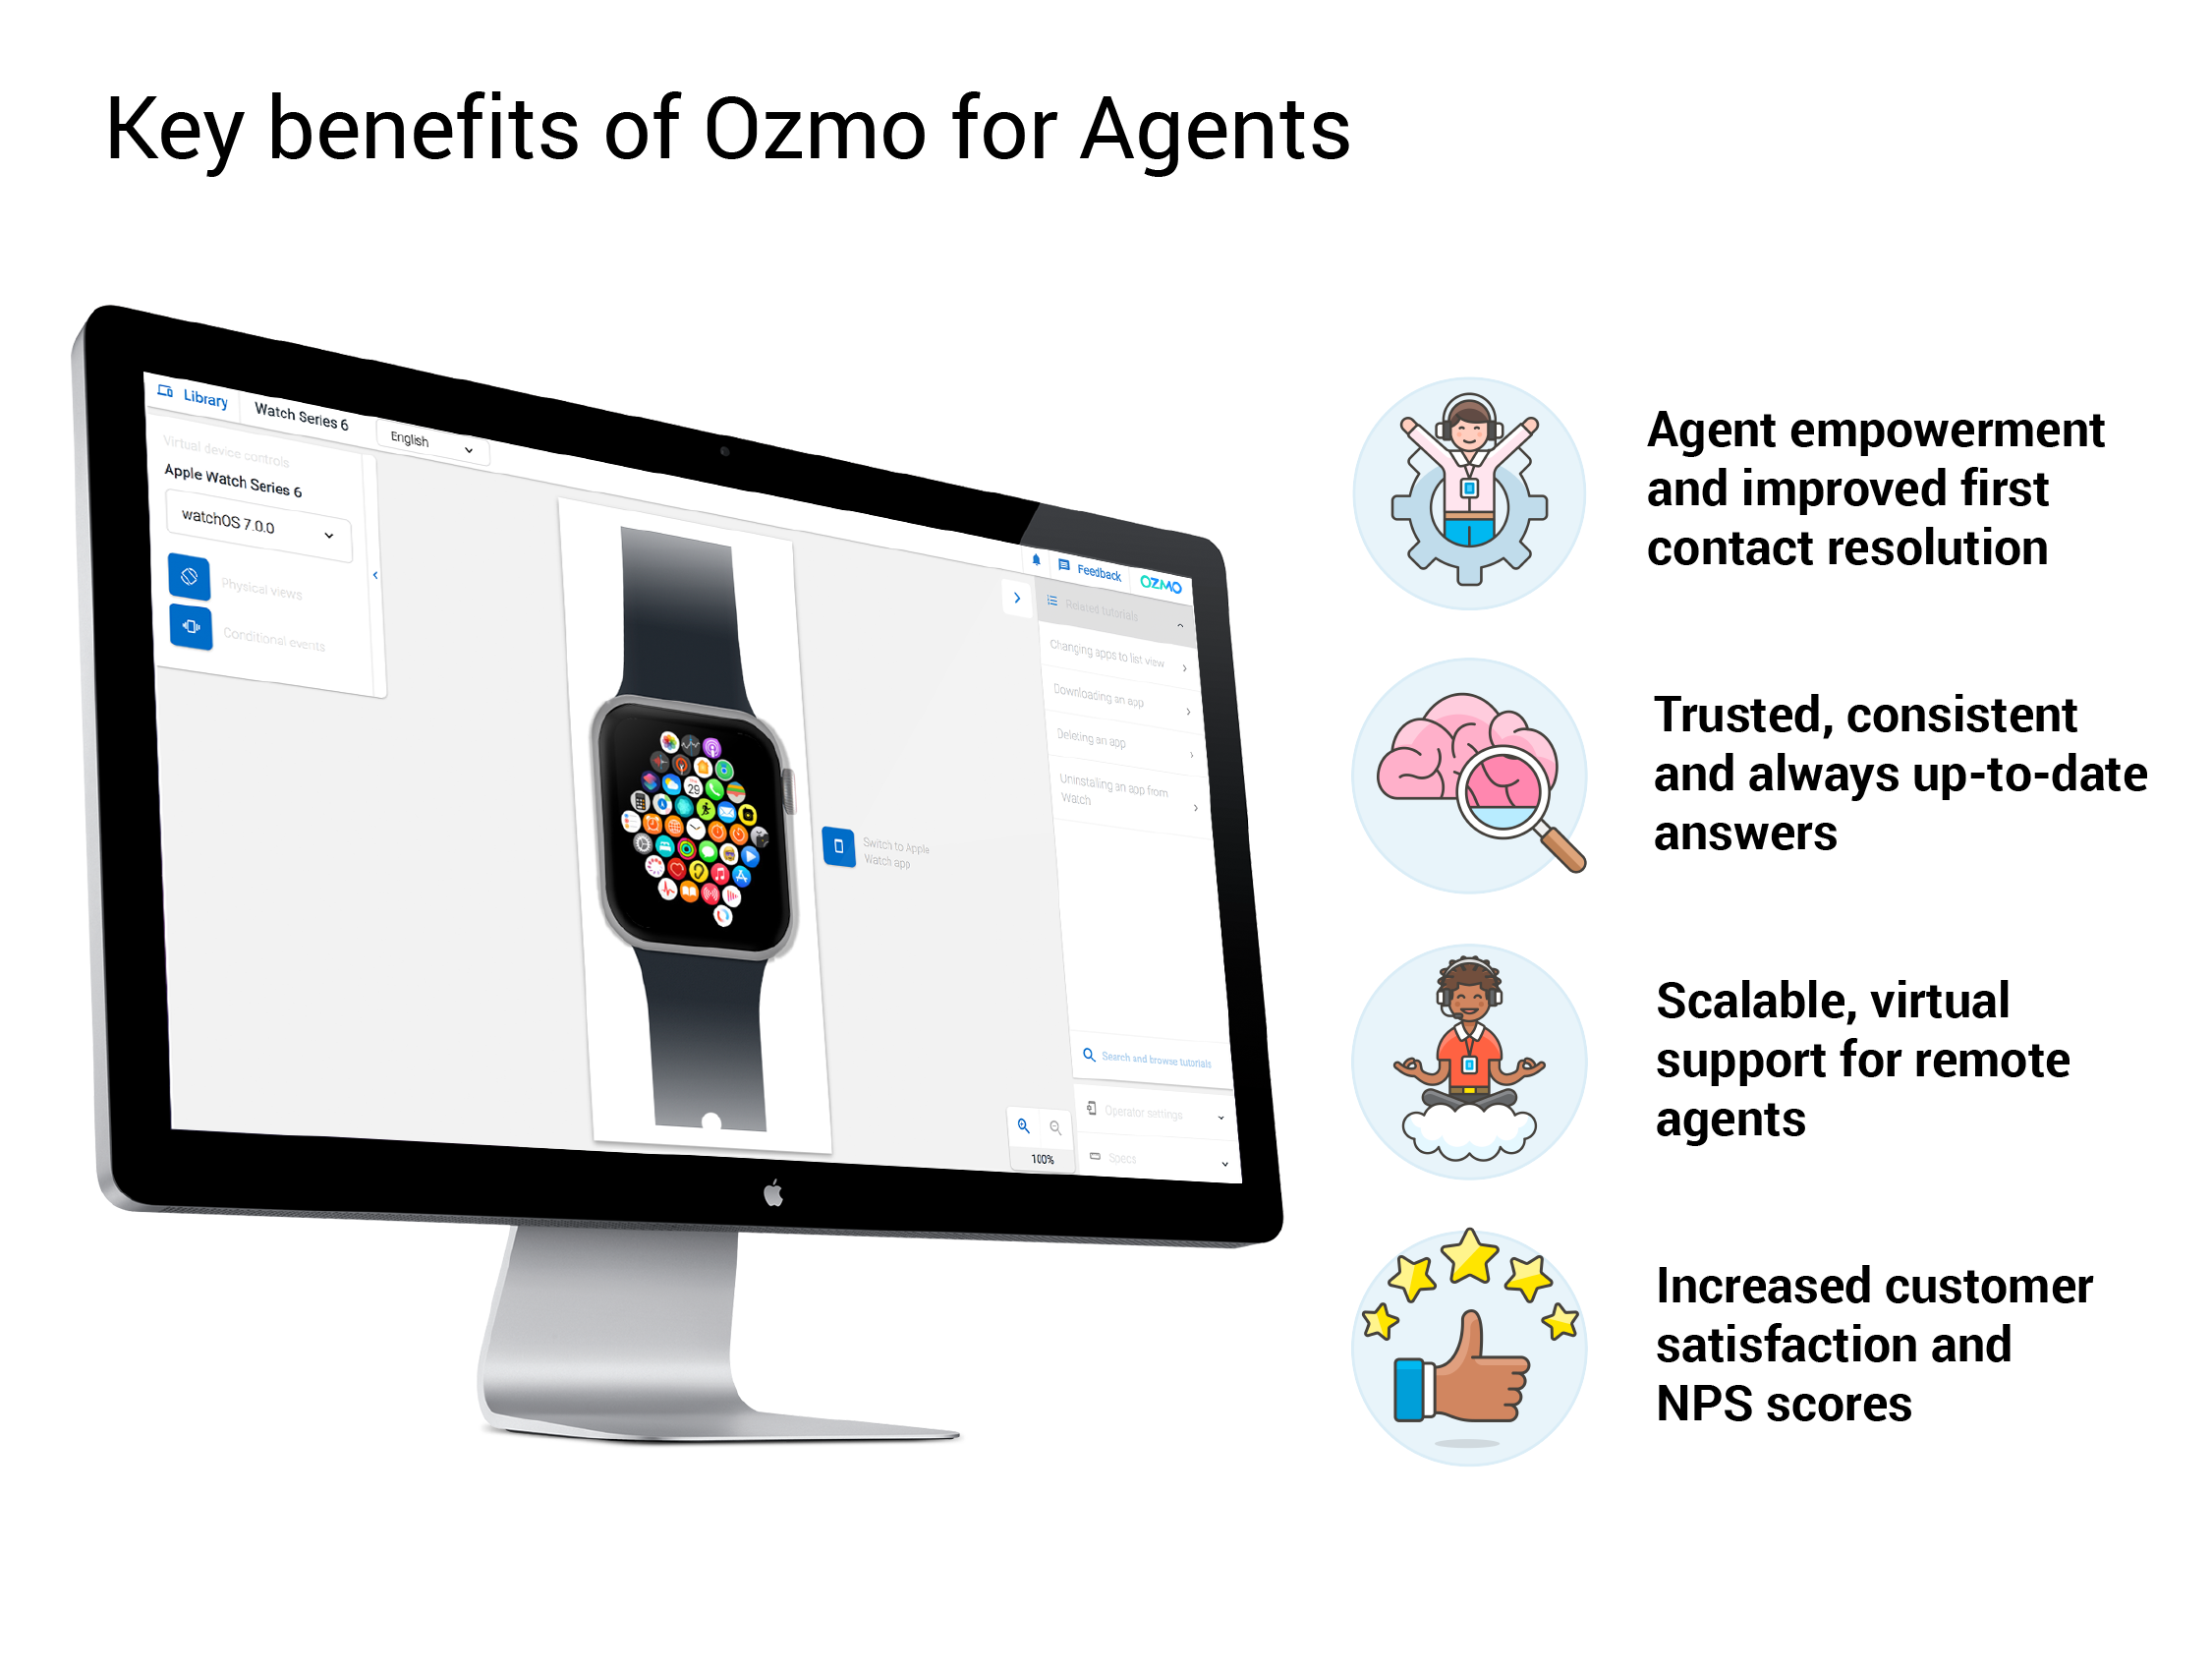 Key benefits of Ozmo for Agents include empowering agents and improving first call contact resolution, keeping a library of up-to-date answers, offering scalable and virtual support for remote agents and increasing customer satisfaction and NPS scores.